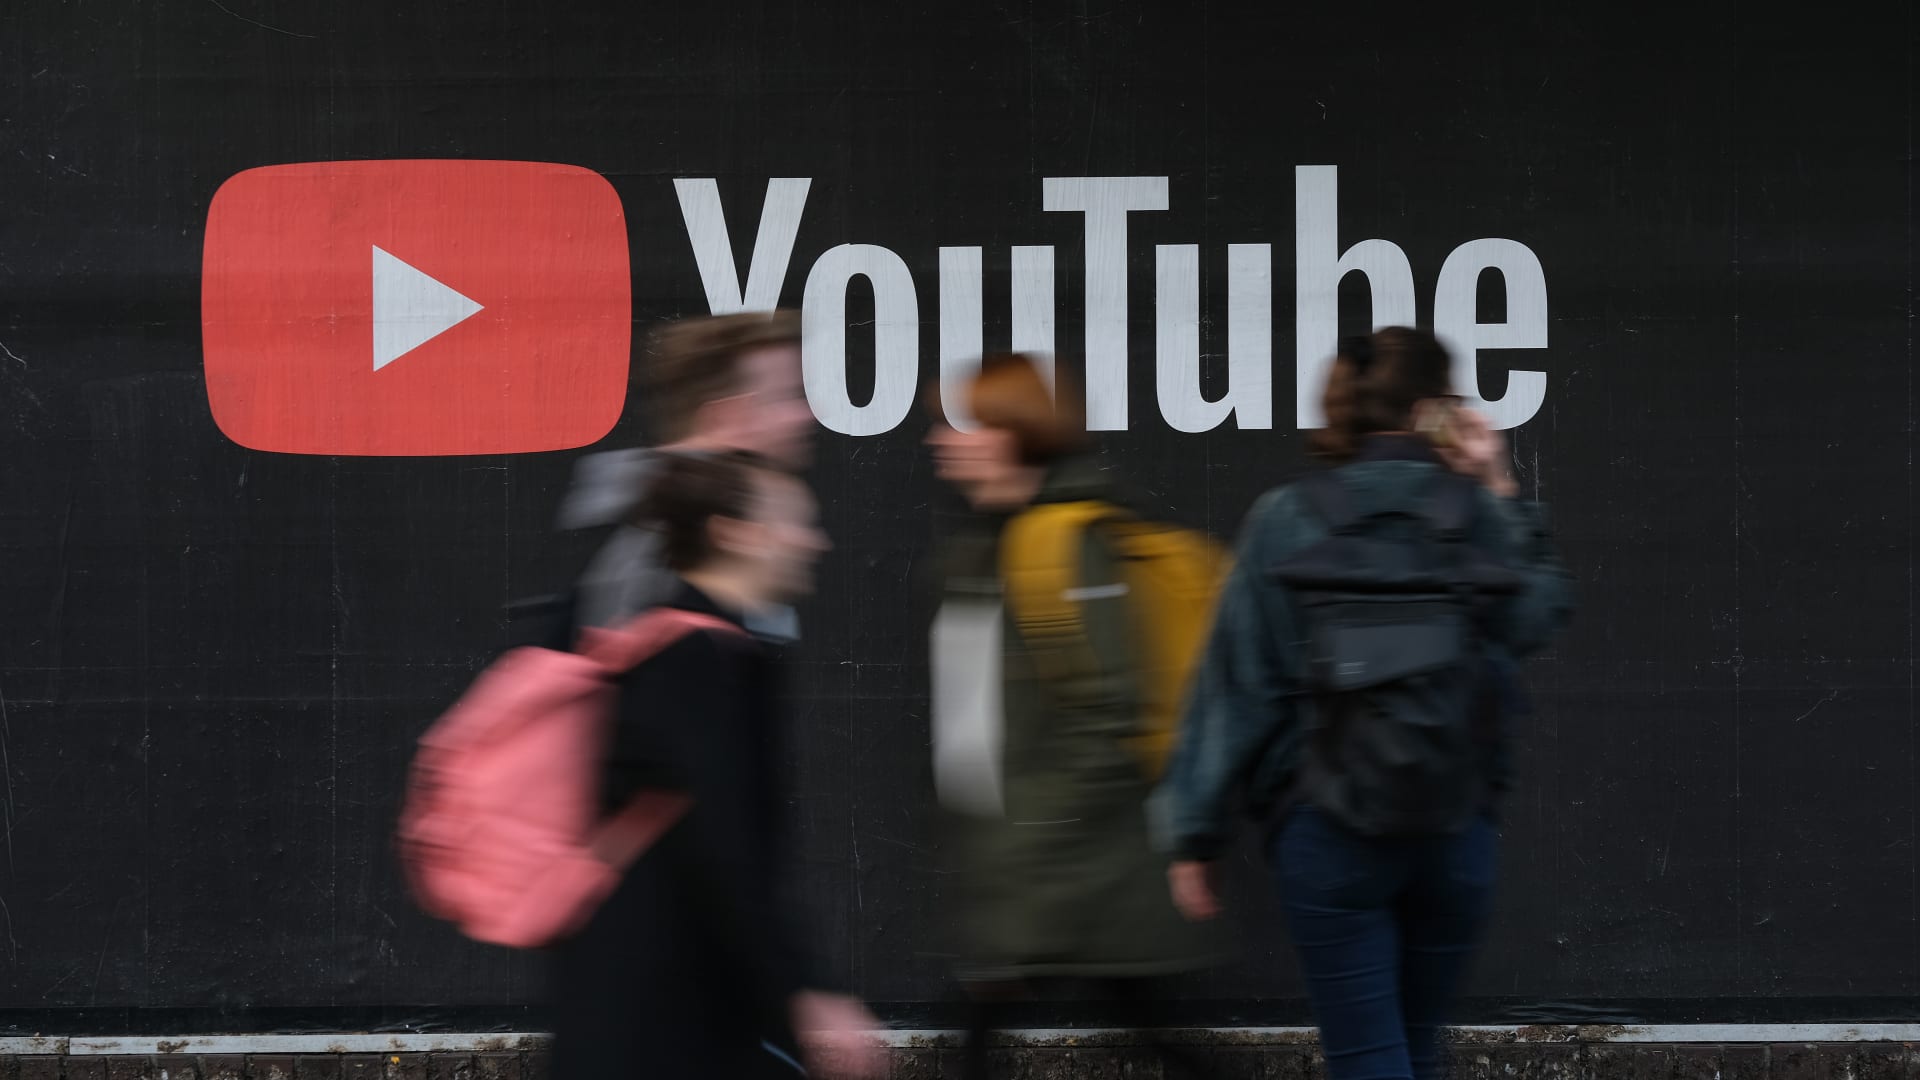 People walk past a billboard advertisement for YouTube on September 27, 2019 in Berlin, Germany.